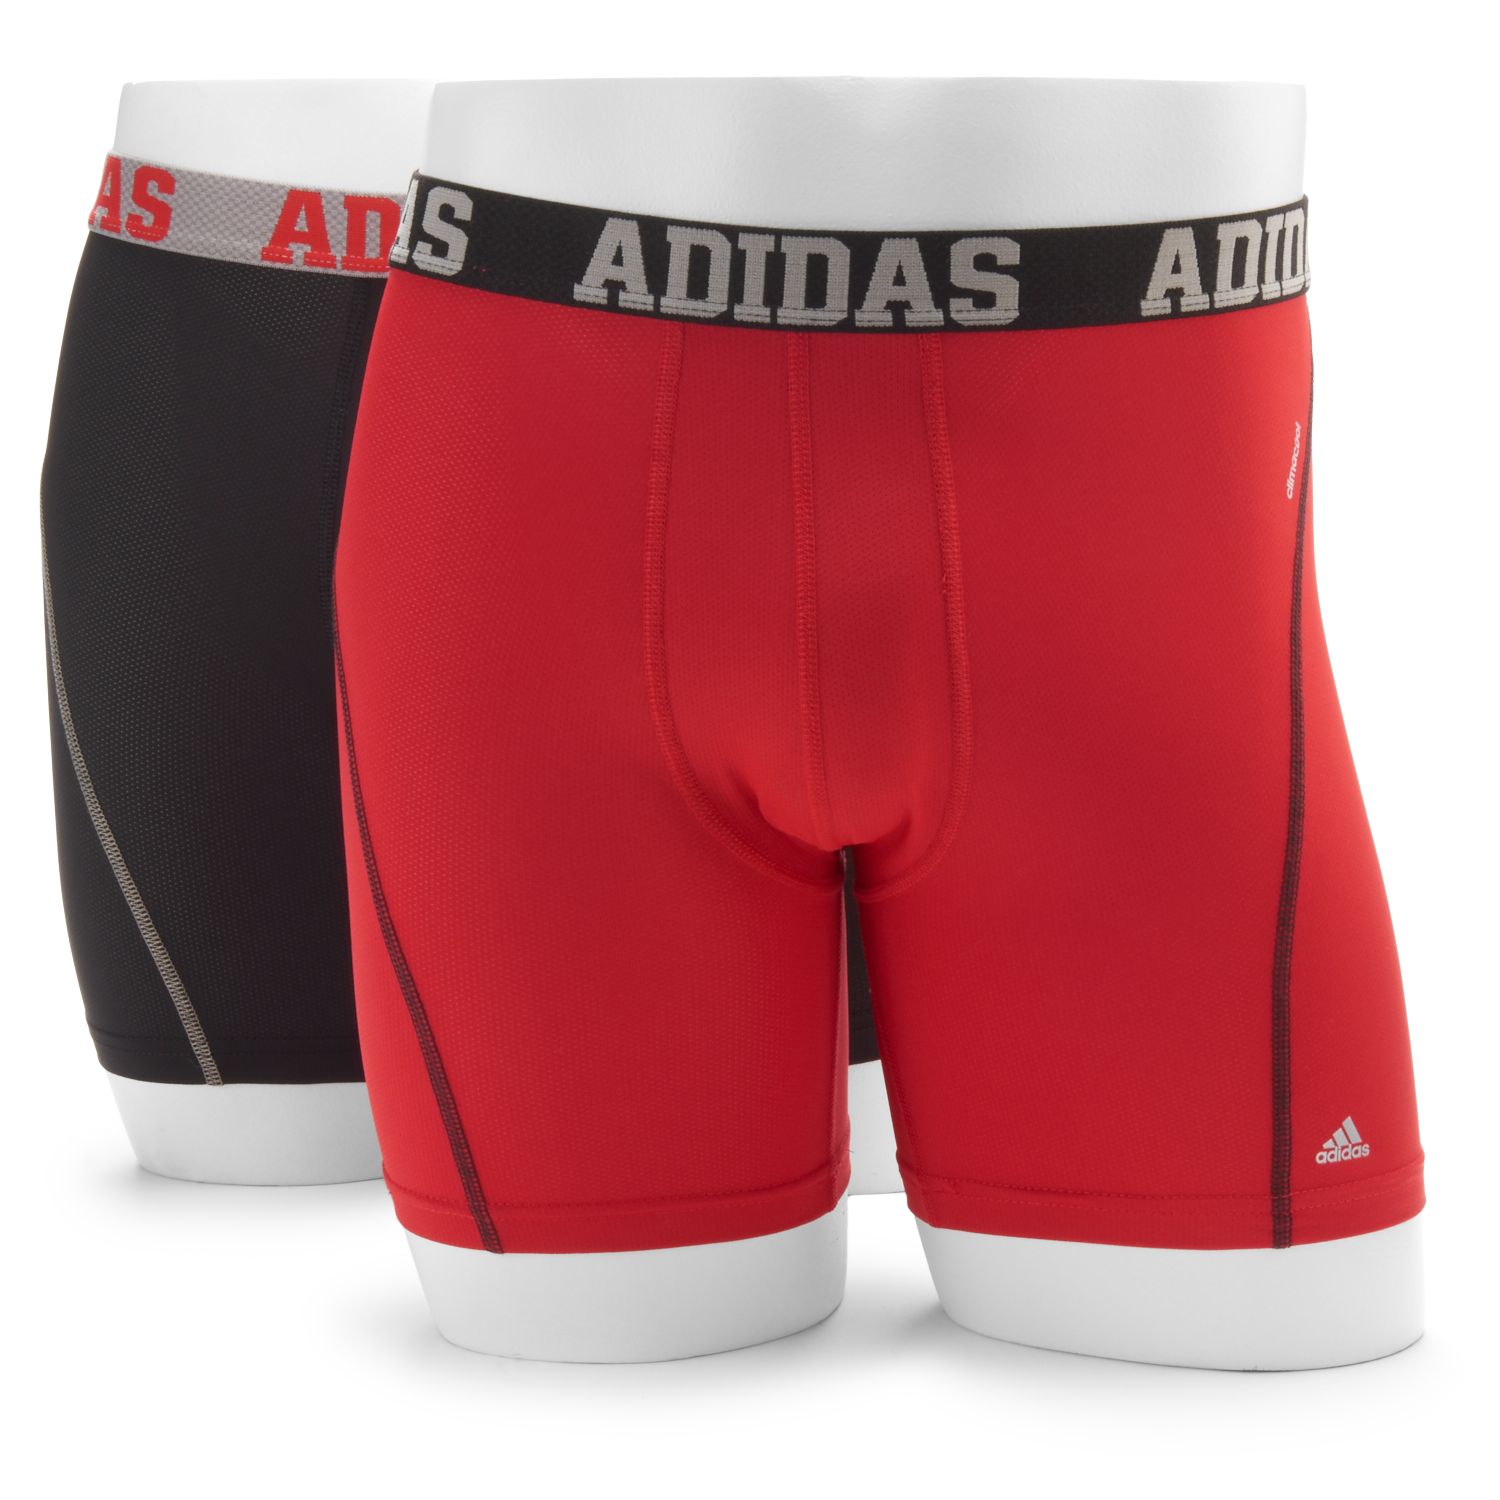 adidas men's climacool 7 midway briefs result